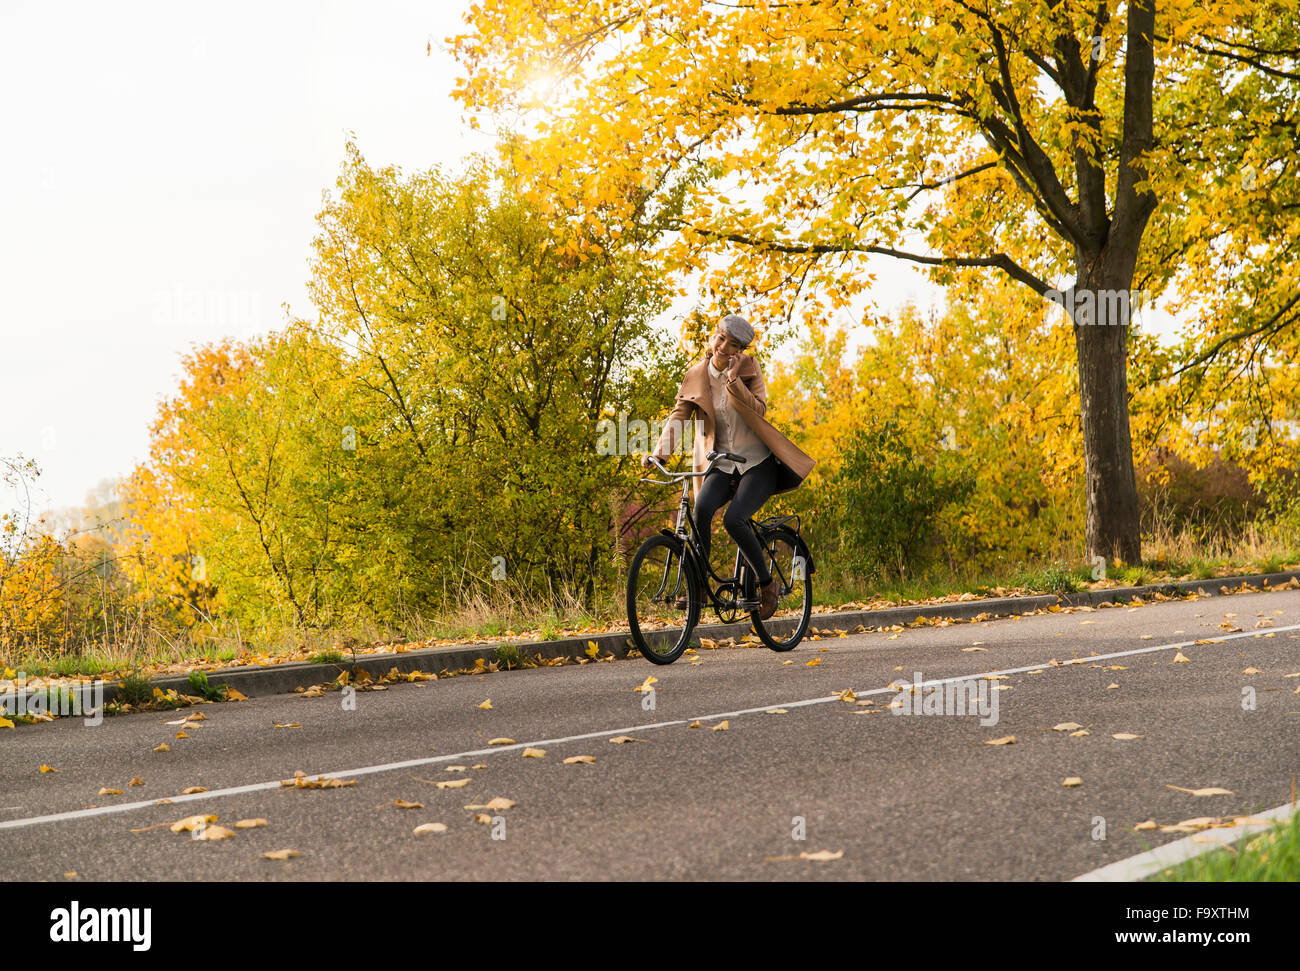 Young woman on cell phone riding bicycle in autumn landscape Stock Photo